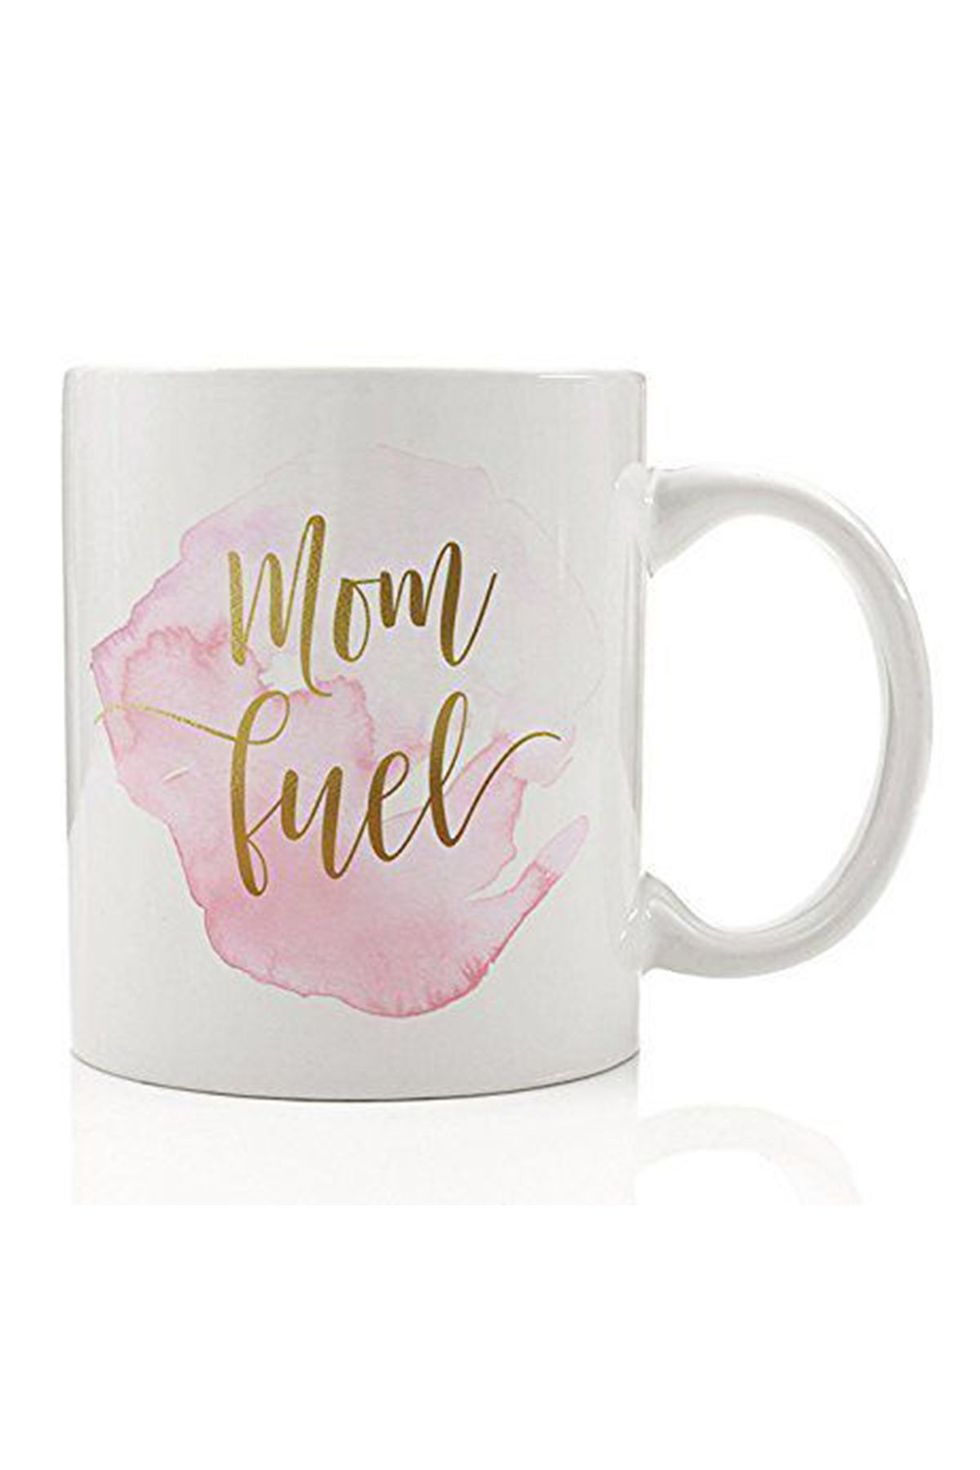 Funny Mom Gifts, Mom Mug Coffee Cup, Gift for Mom Gift Idea, Mom Birthday  Present, Best Mom Ever, Gift From Daughter, Gift From Son L-37R 